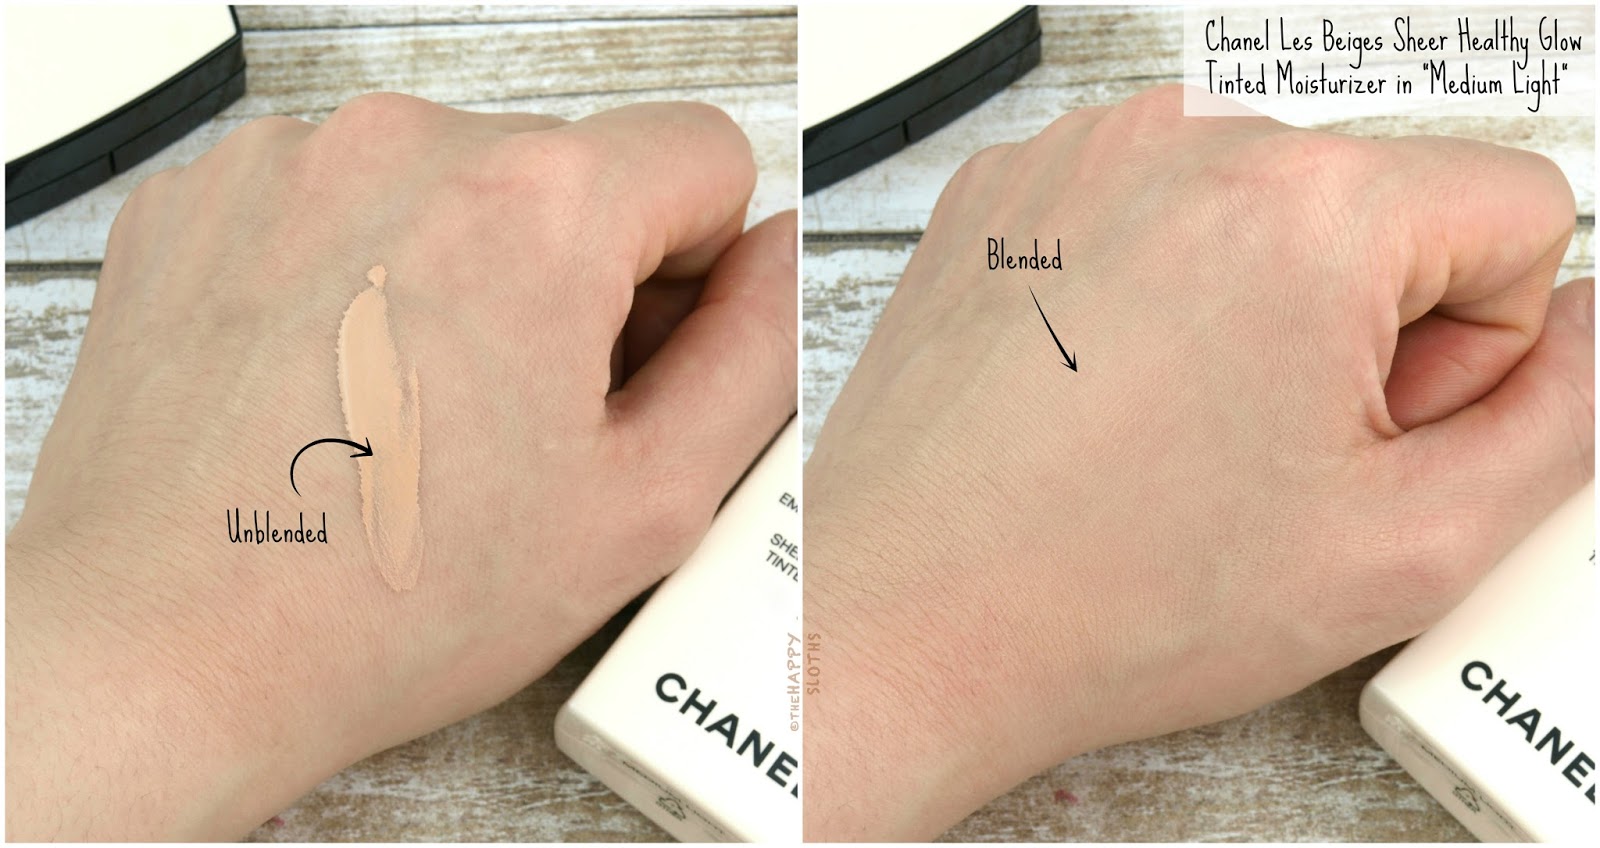 Chanel Les Beiges Sheer Healthy Glow Tinted Moisturizer in "Medium Light": Review and Swatches